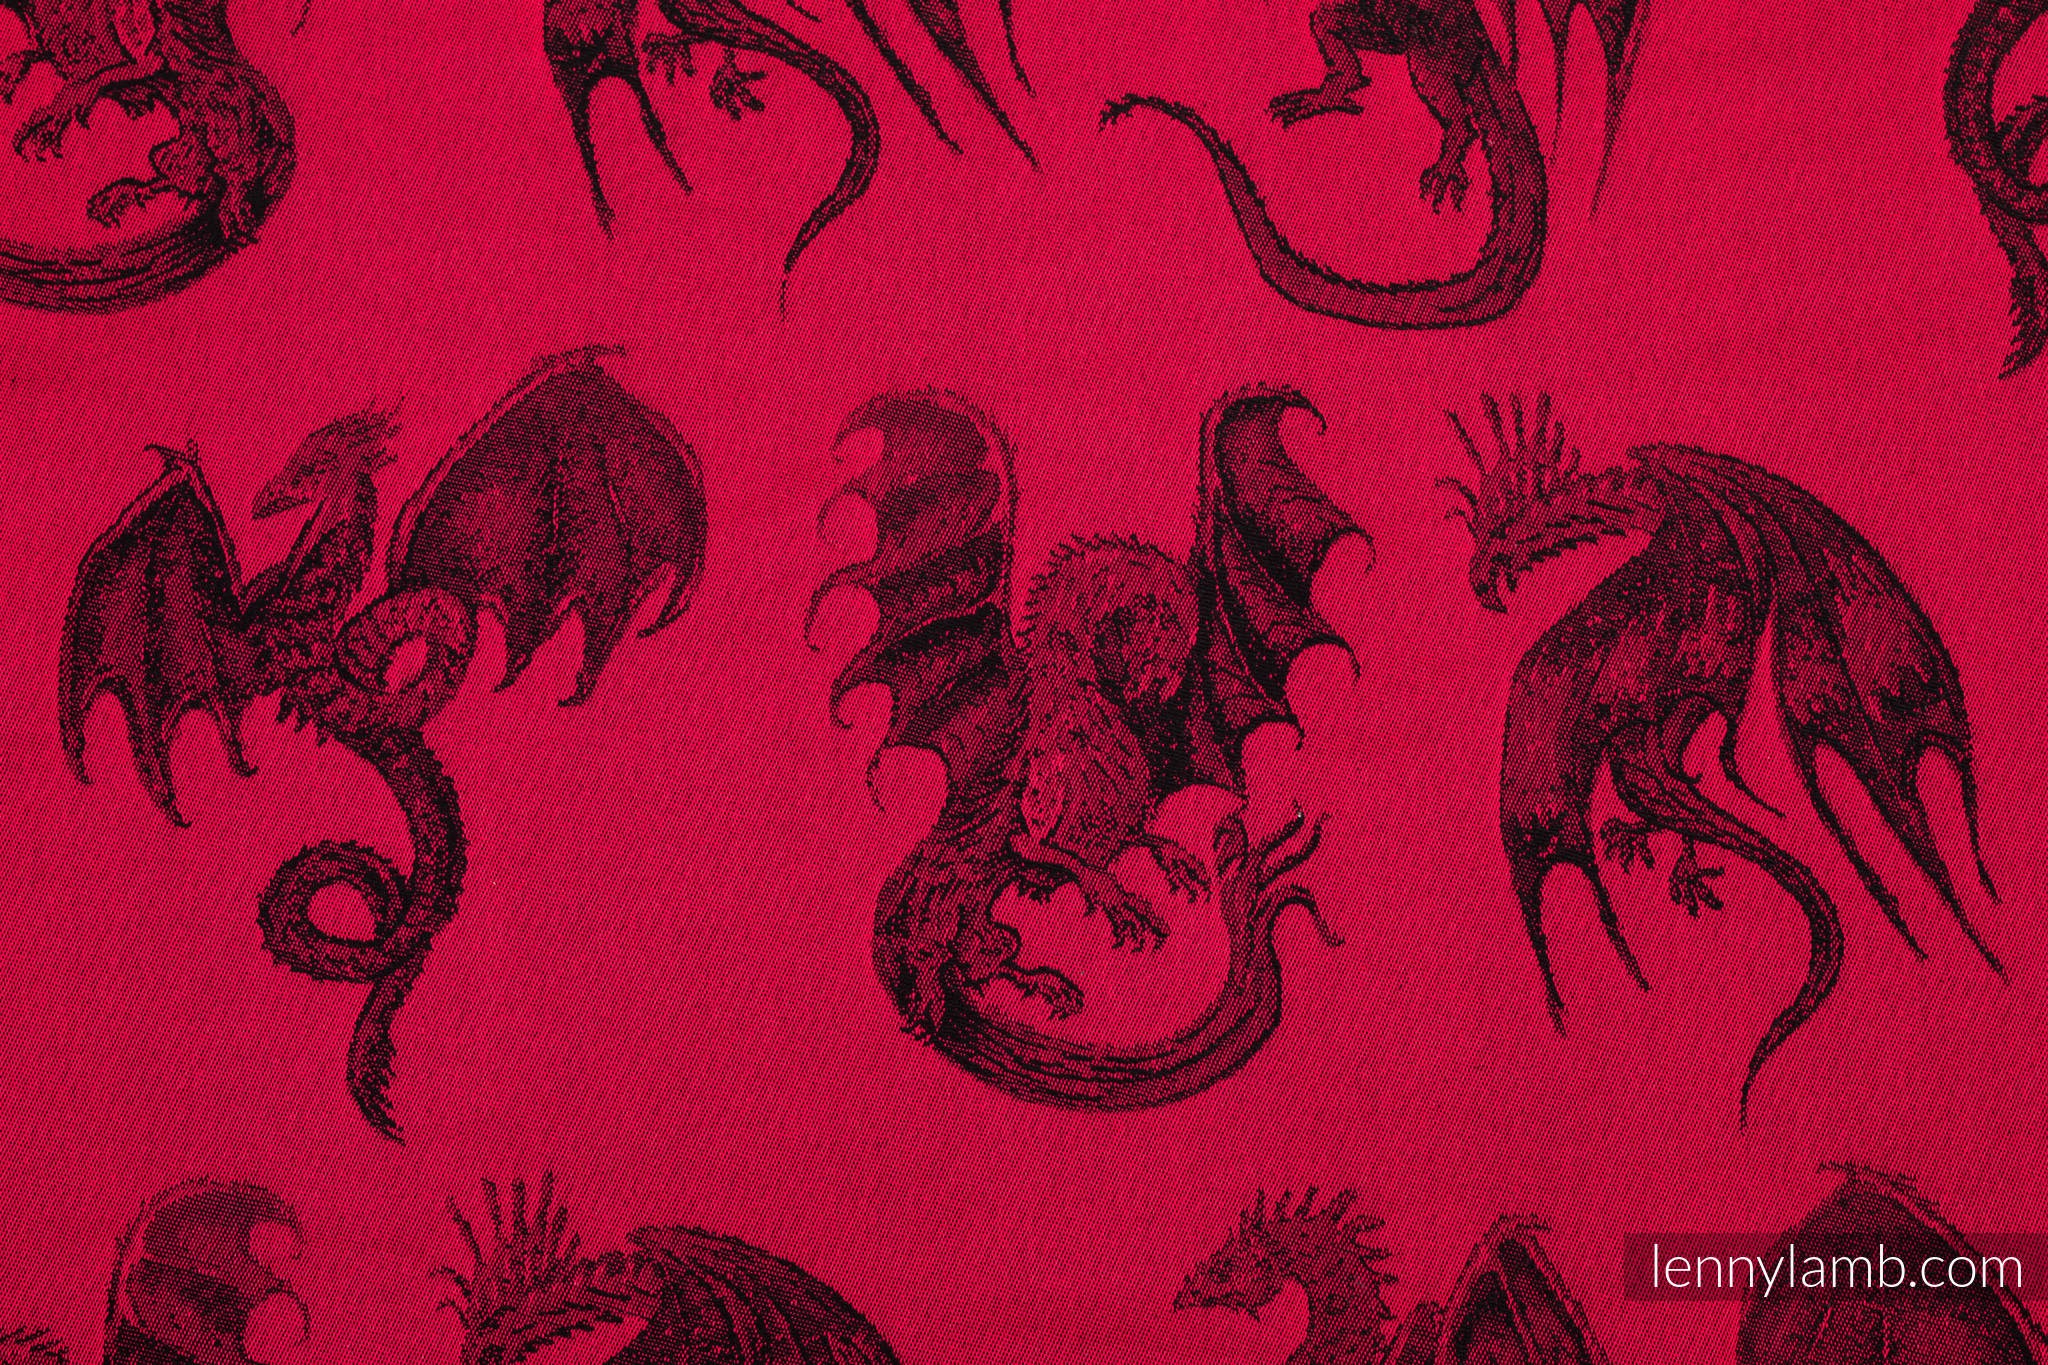 Lenny Lamb Dragon - Fire and Blood  Image